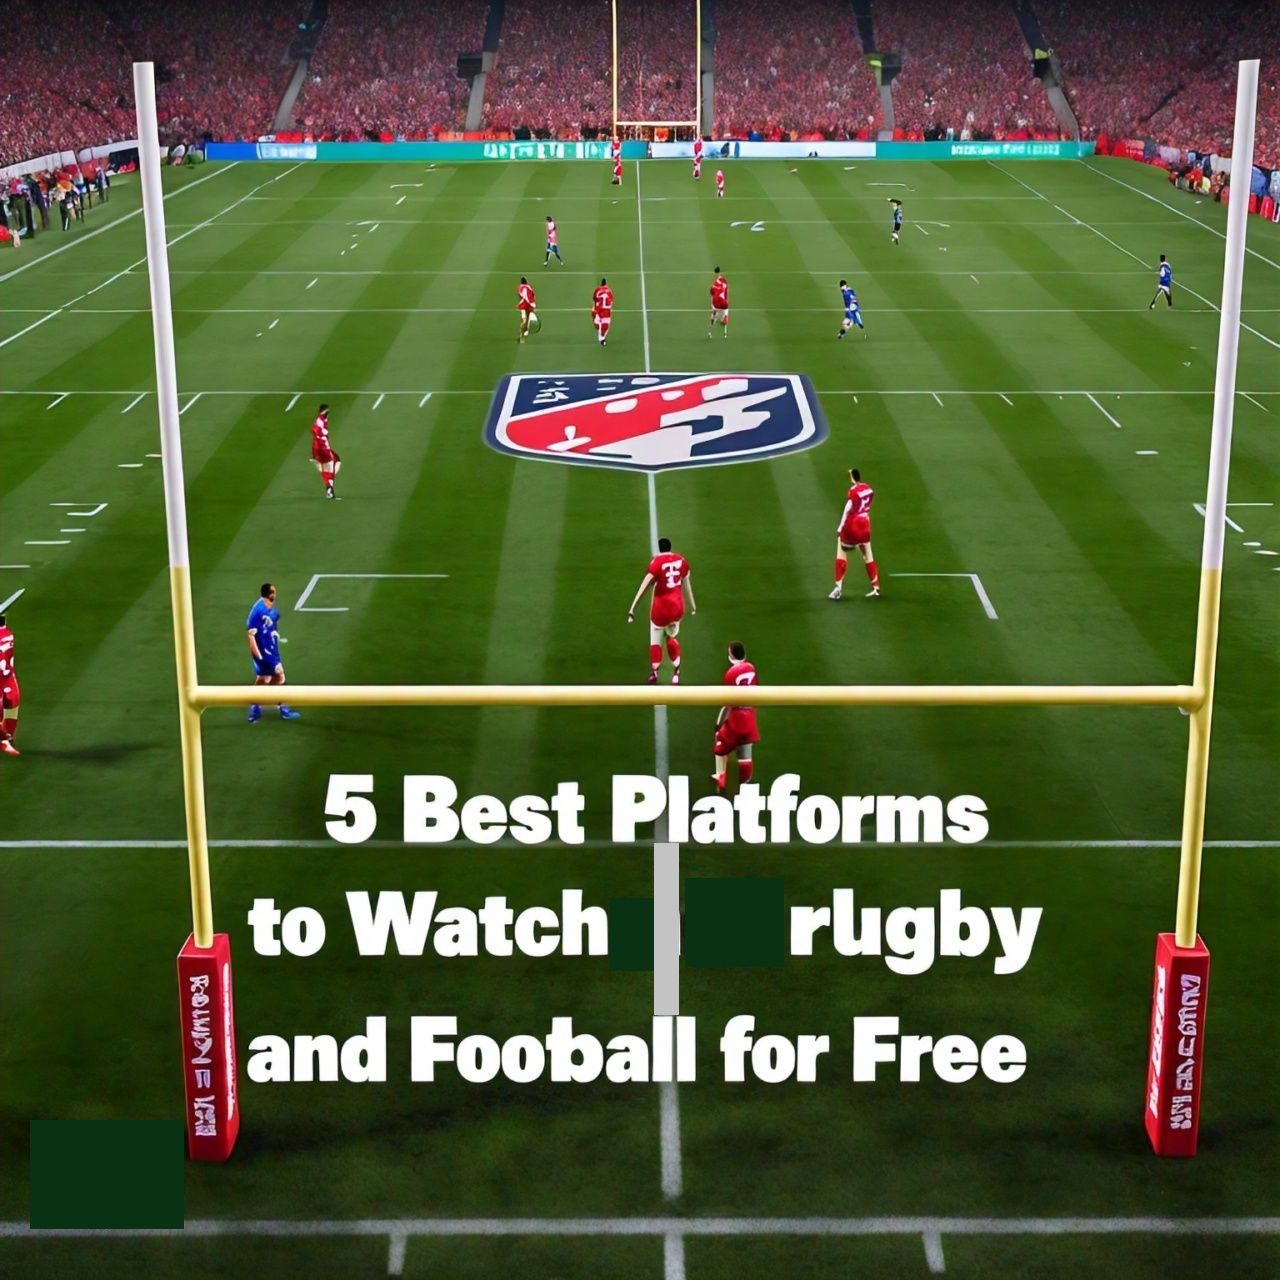 5 Best Platforms to Watch Rugby and Football for Free